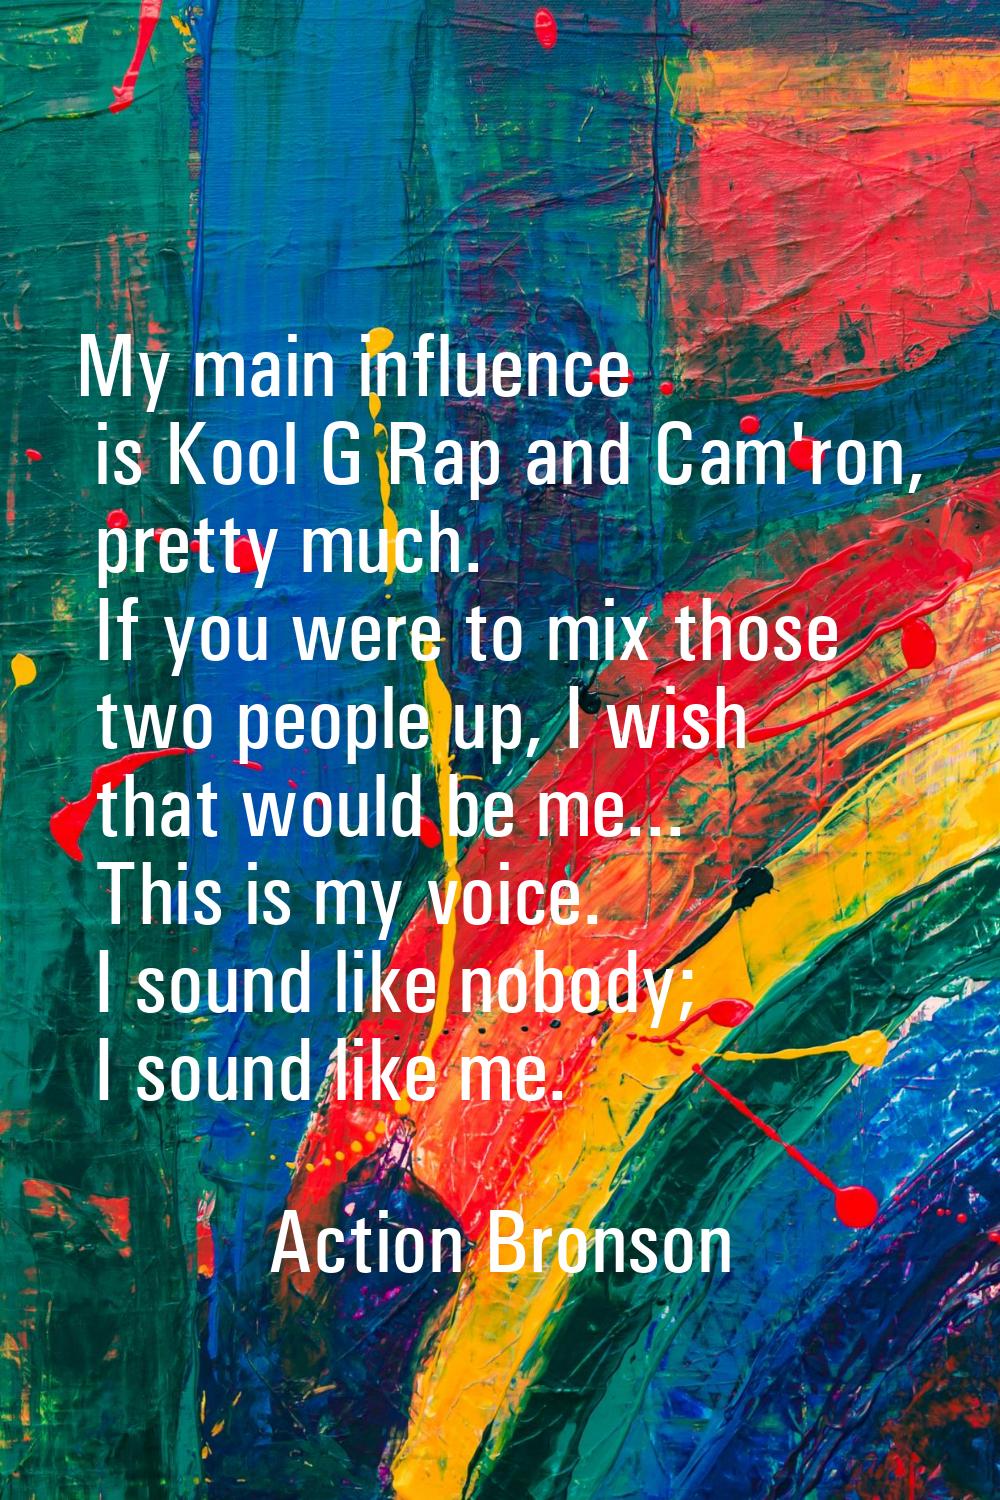 My main influence is Kool G Rap and Cam'ron, pretty much. If you were to mix those two people up, I